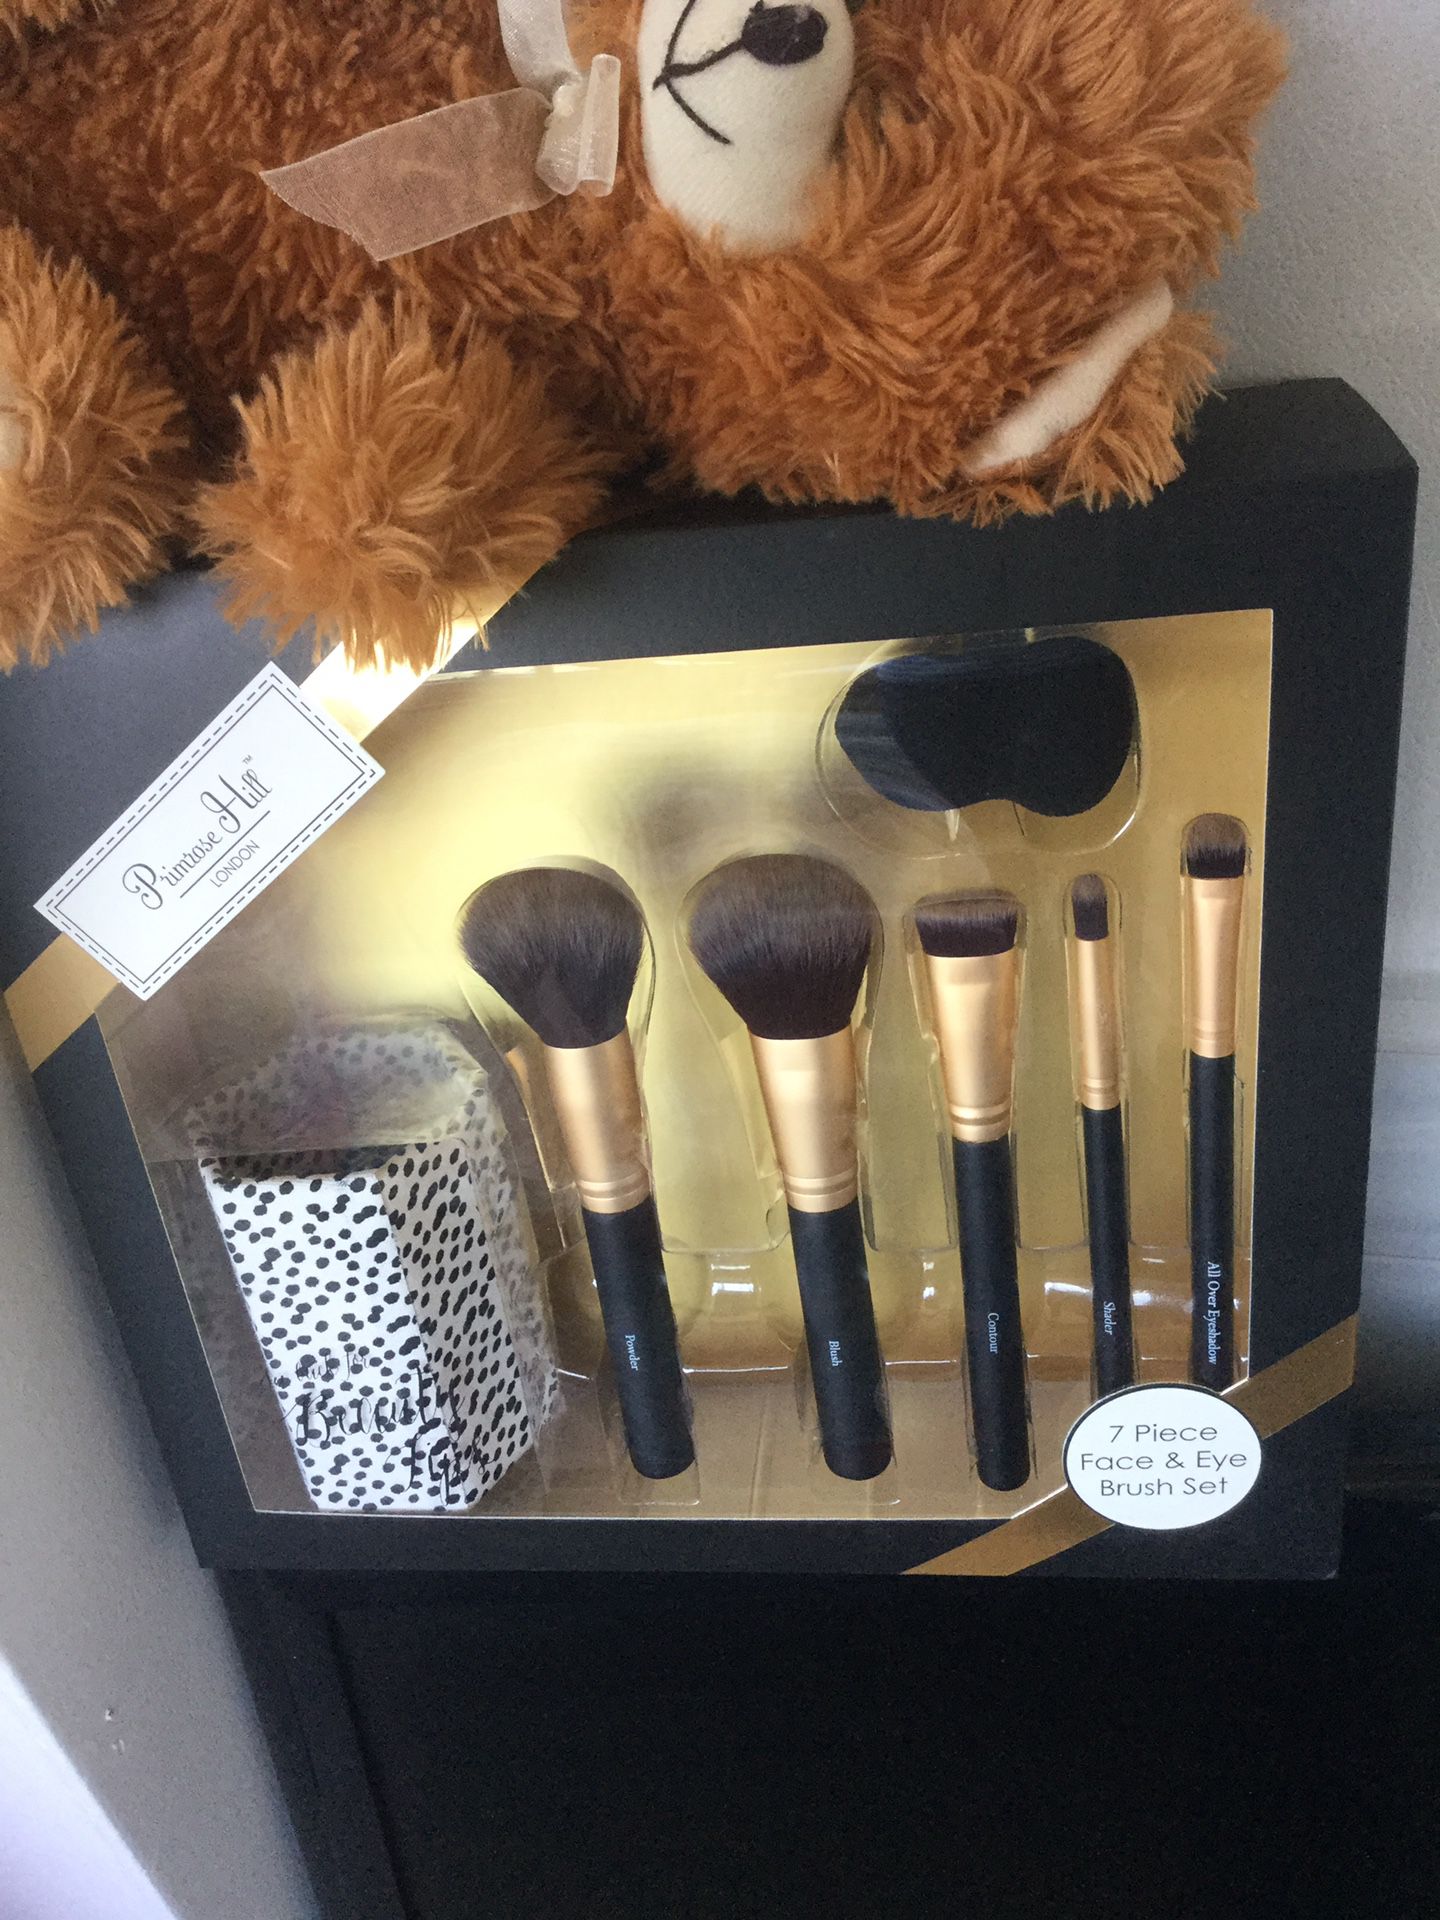 Make up brush set of 7 for Face & eyes / New in the box 